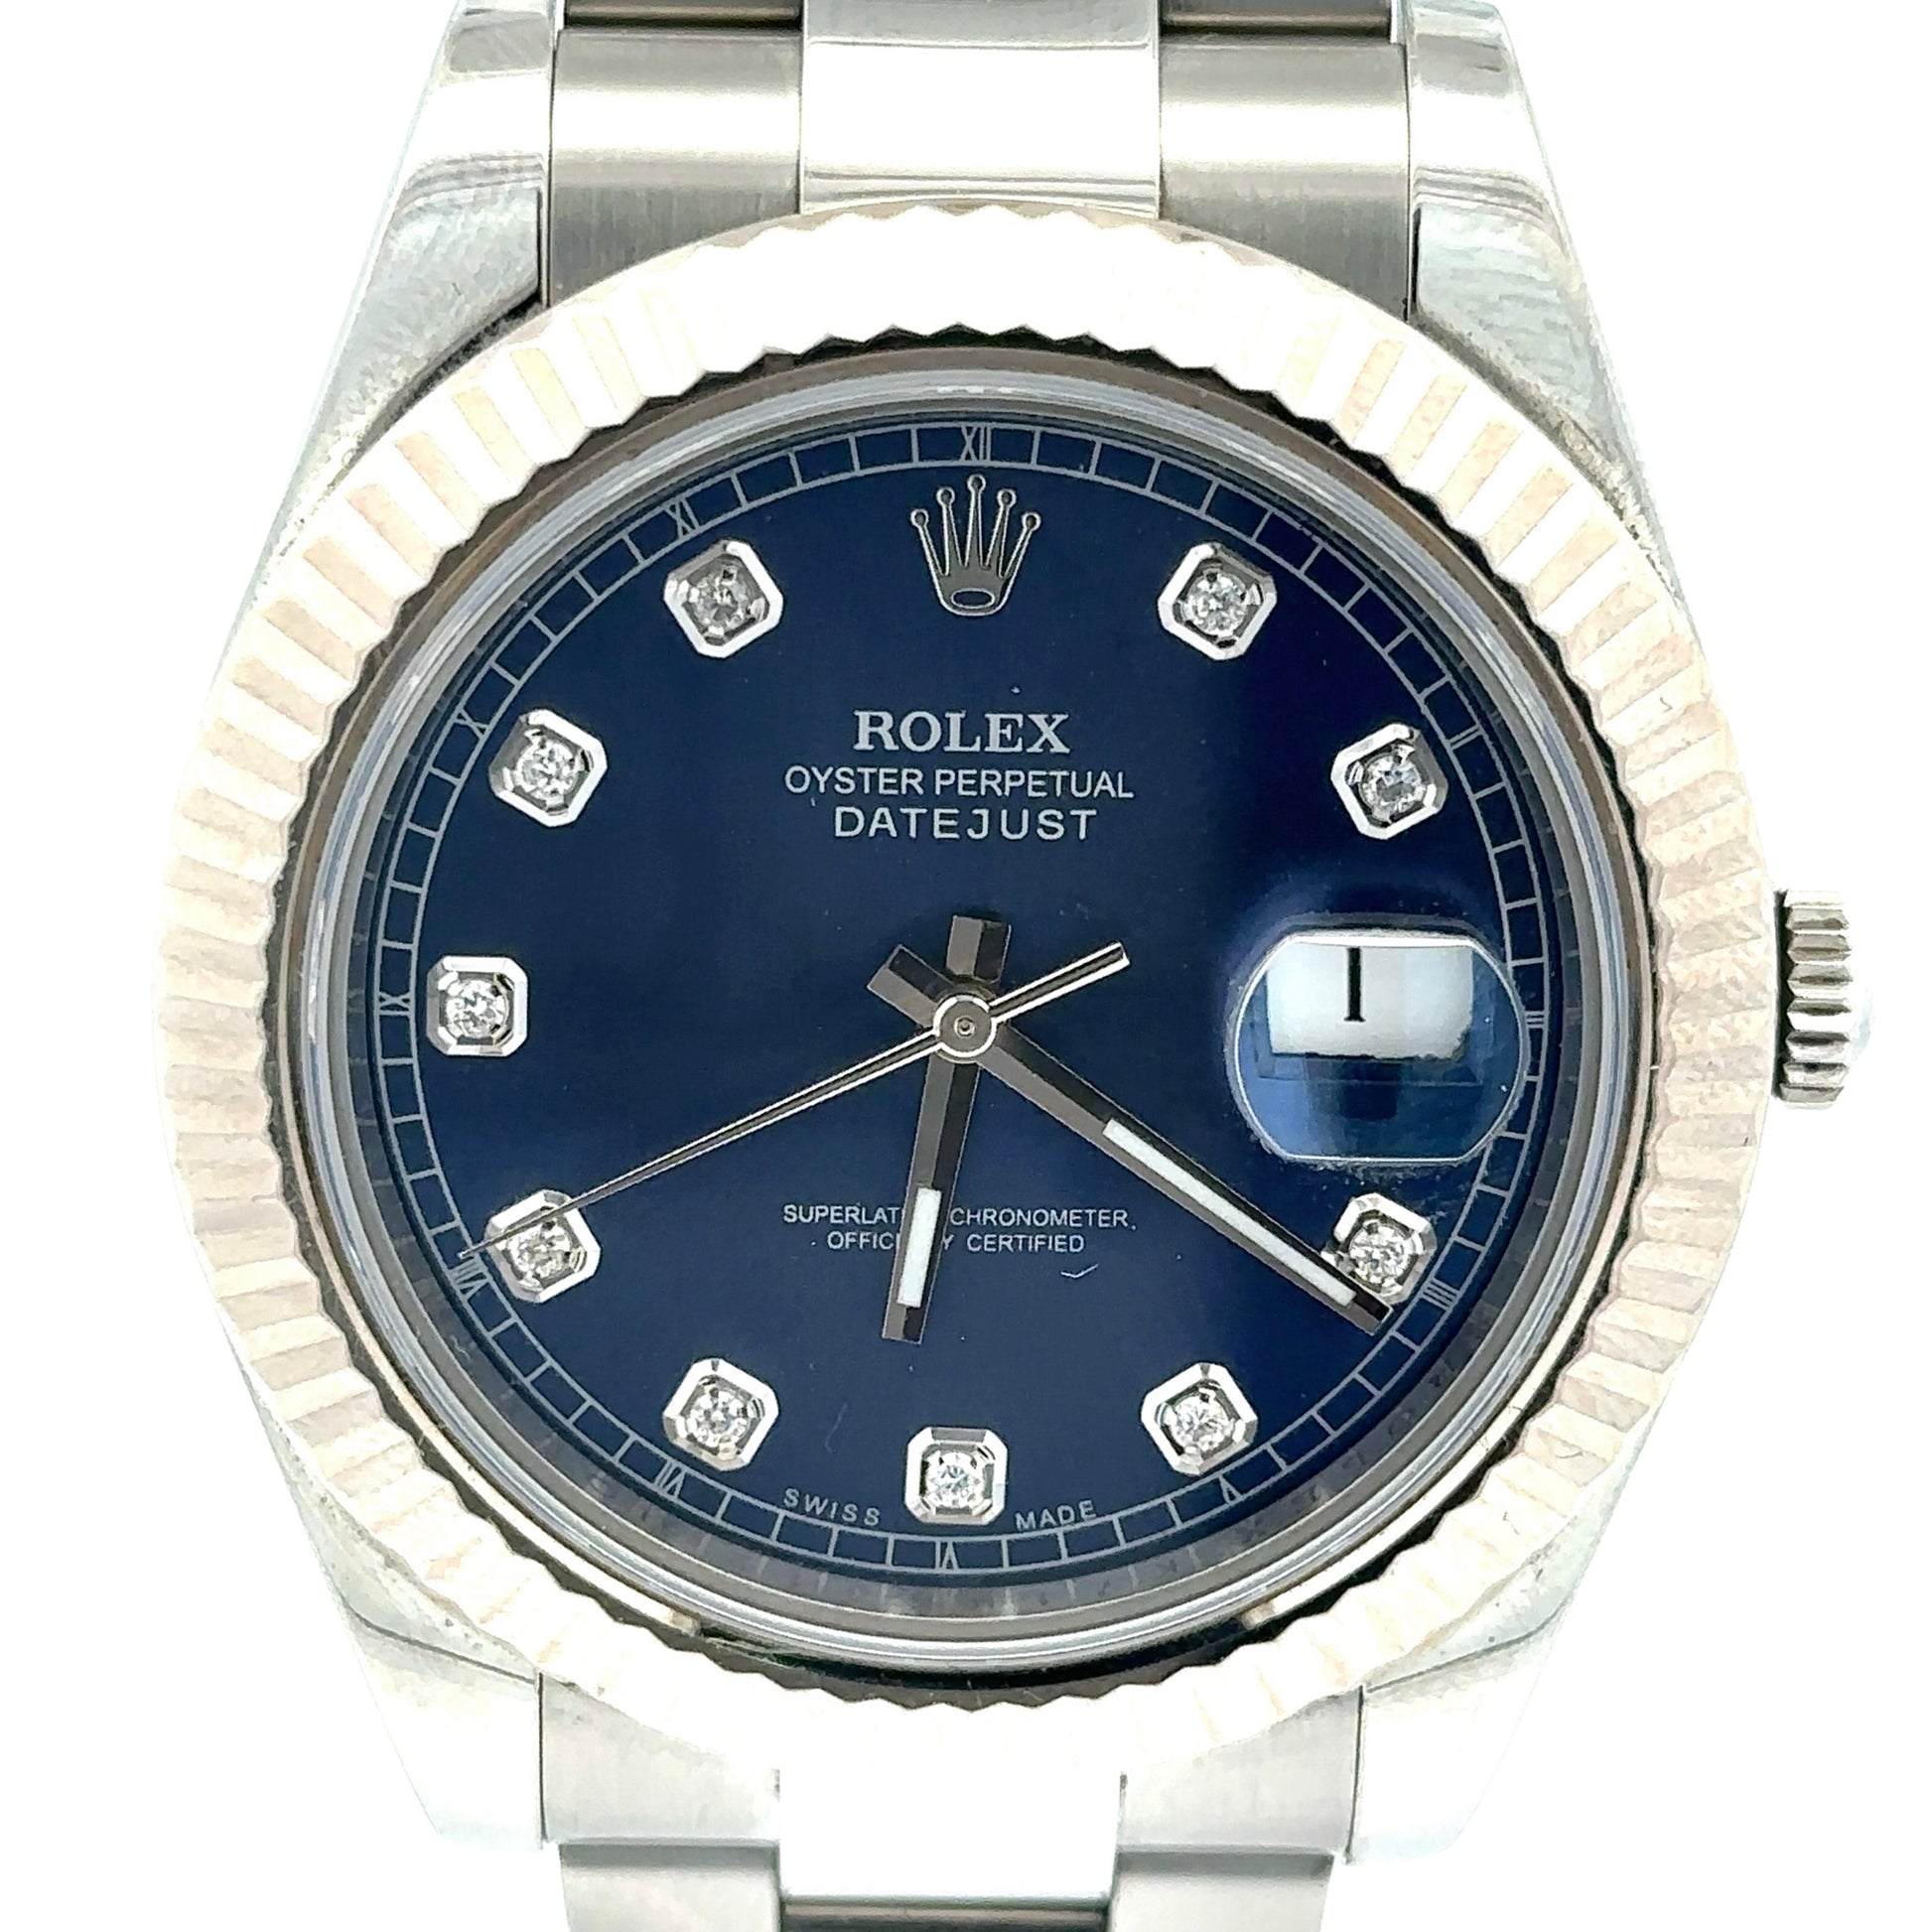 Close up of Rolex Blue face with 10 diamond hour markers 